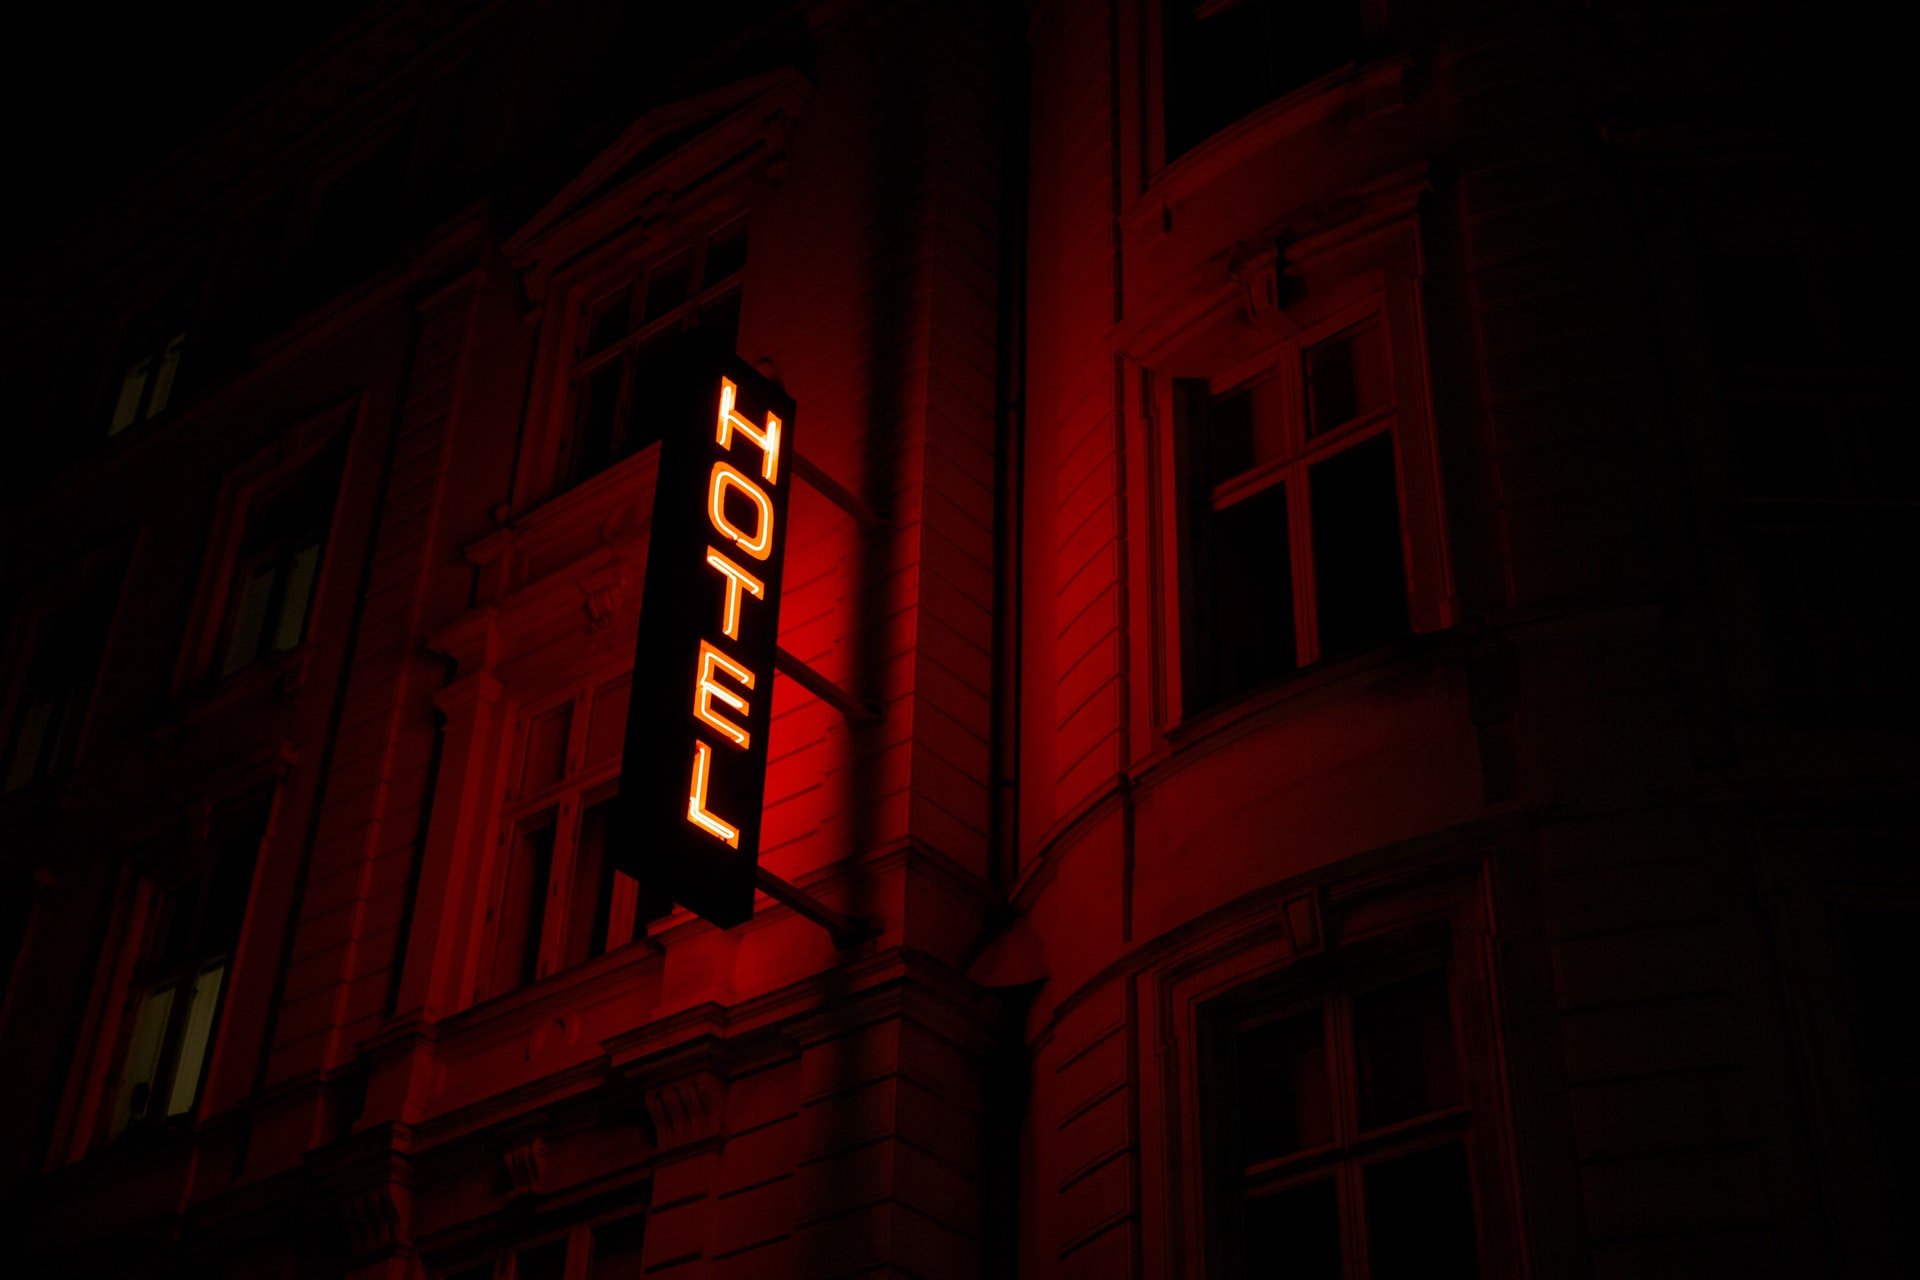 OP decided to spend the night at a hotel. | Source: Unsplash